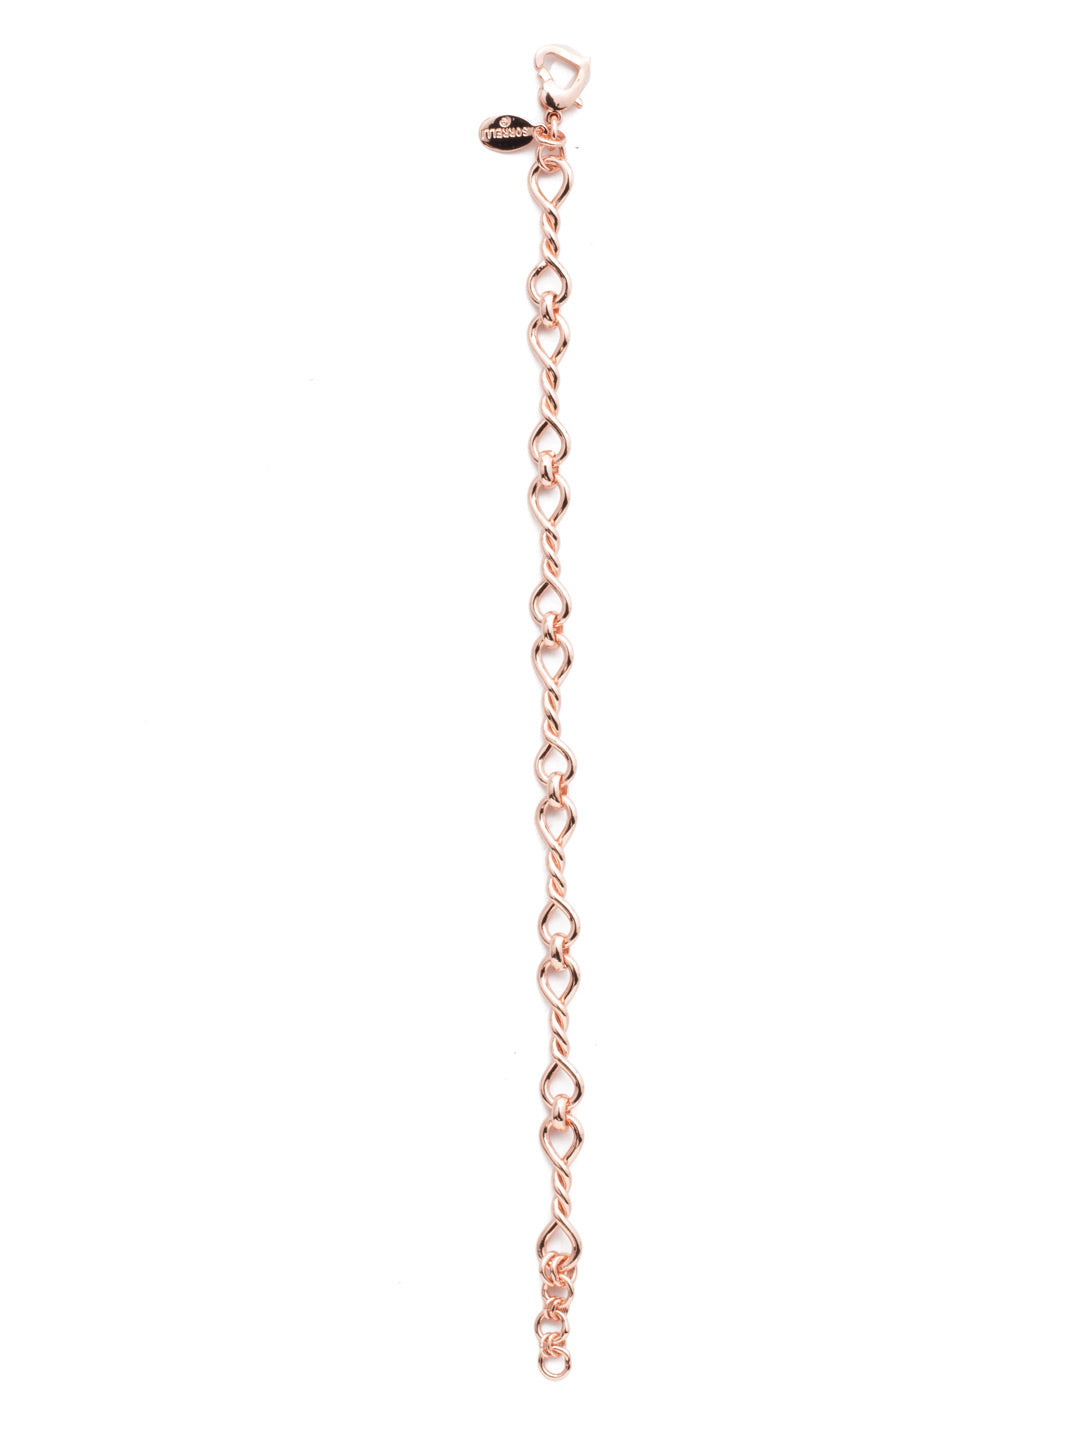 Odilia Tennis Bracelet - BES35RGCRY - <p>The Odilia Tennis Bracelet, featuring a heart-shaped clasp, pairs perfectly with our crystal charms for a lovely everyday look. From Sorrelli's Crystal collection in our Rose Gold-tone finish.</p>